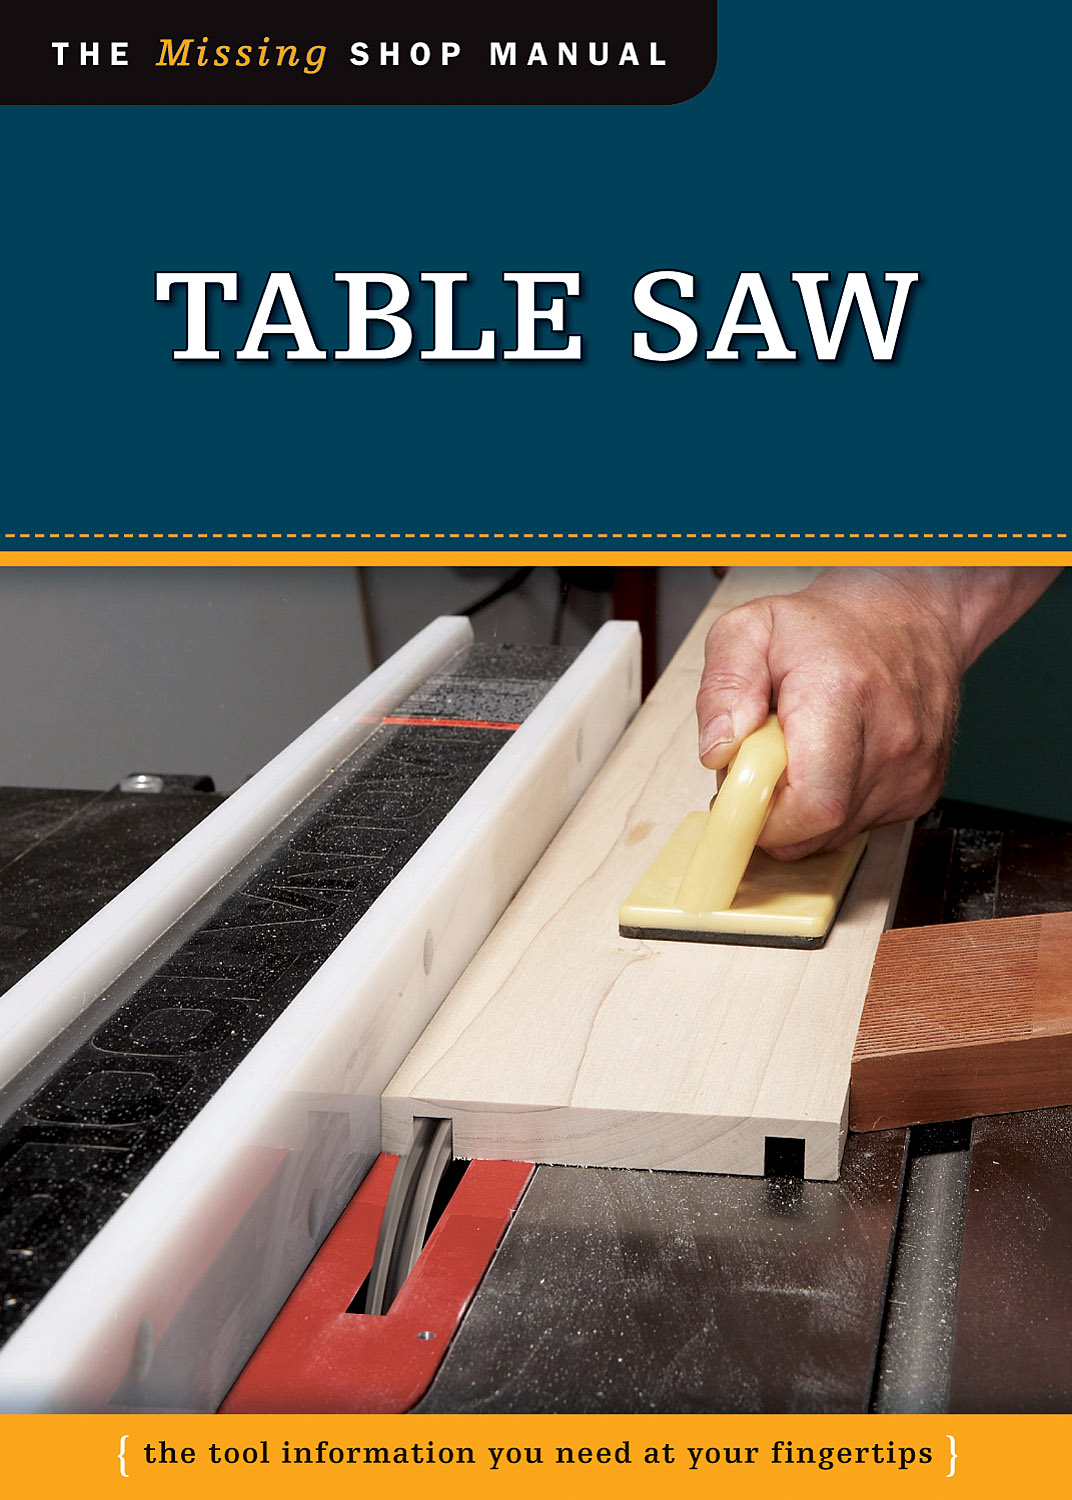 Tablesaw - The Missing Shop Manual